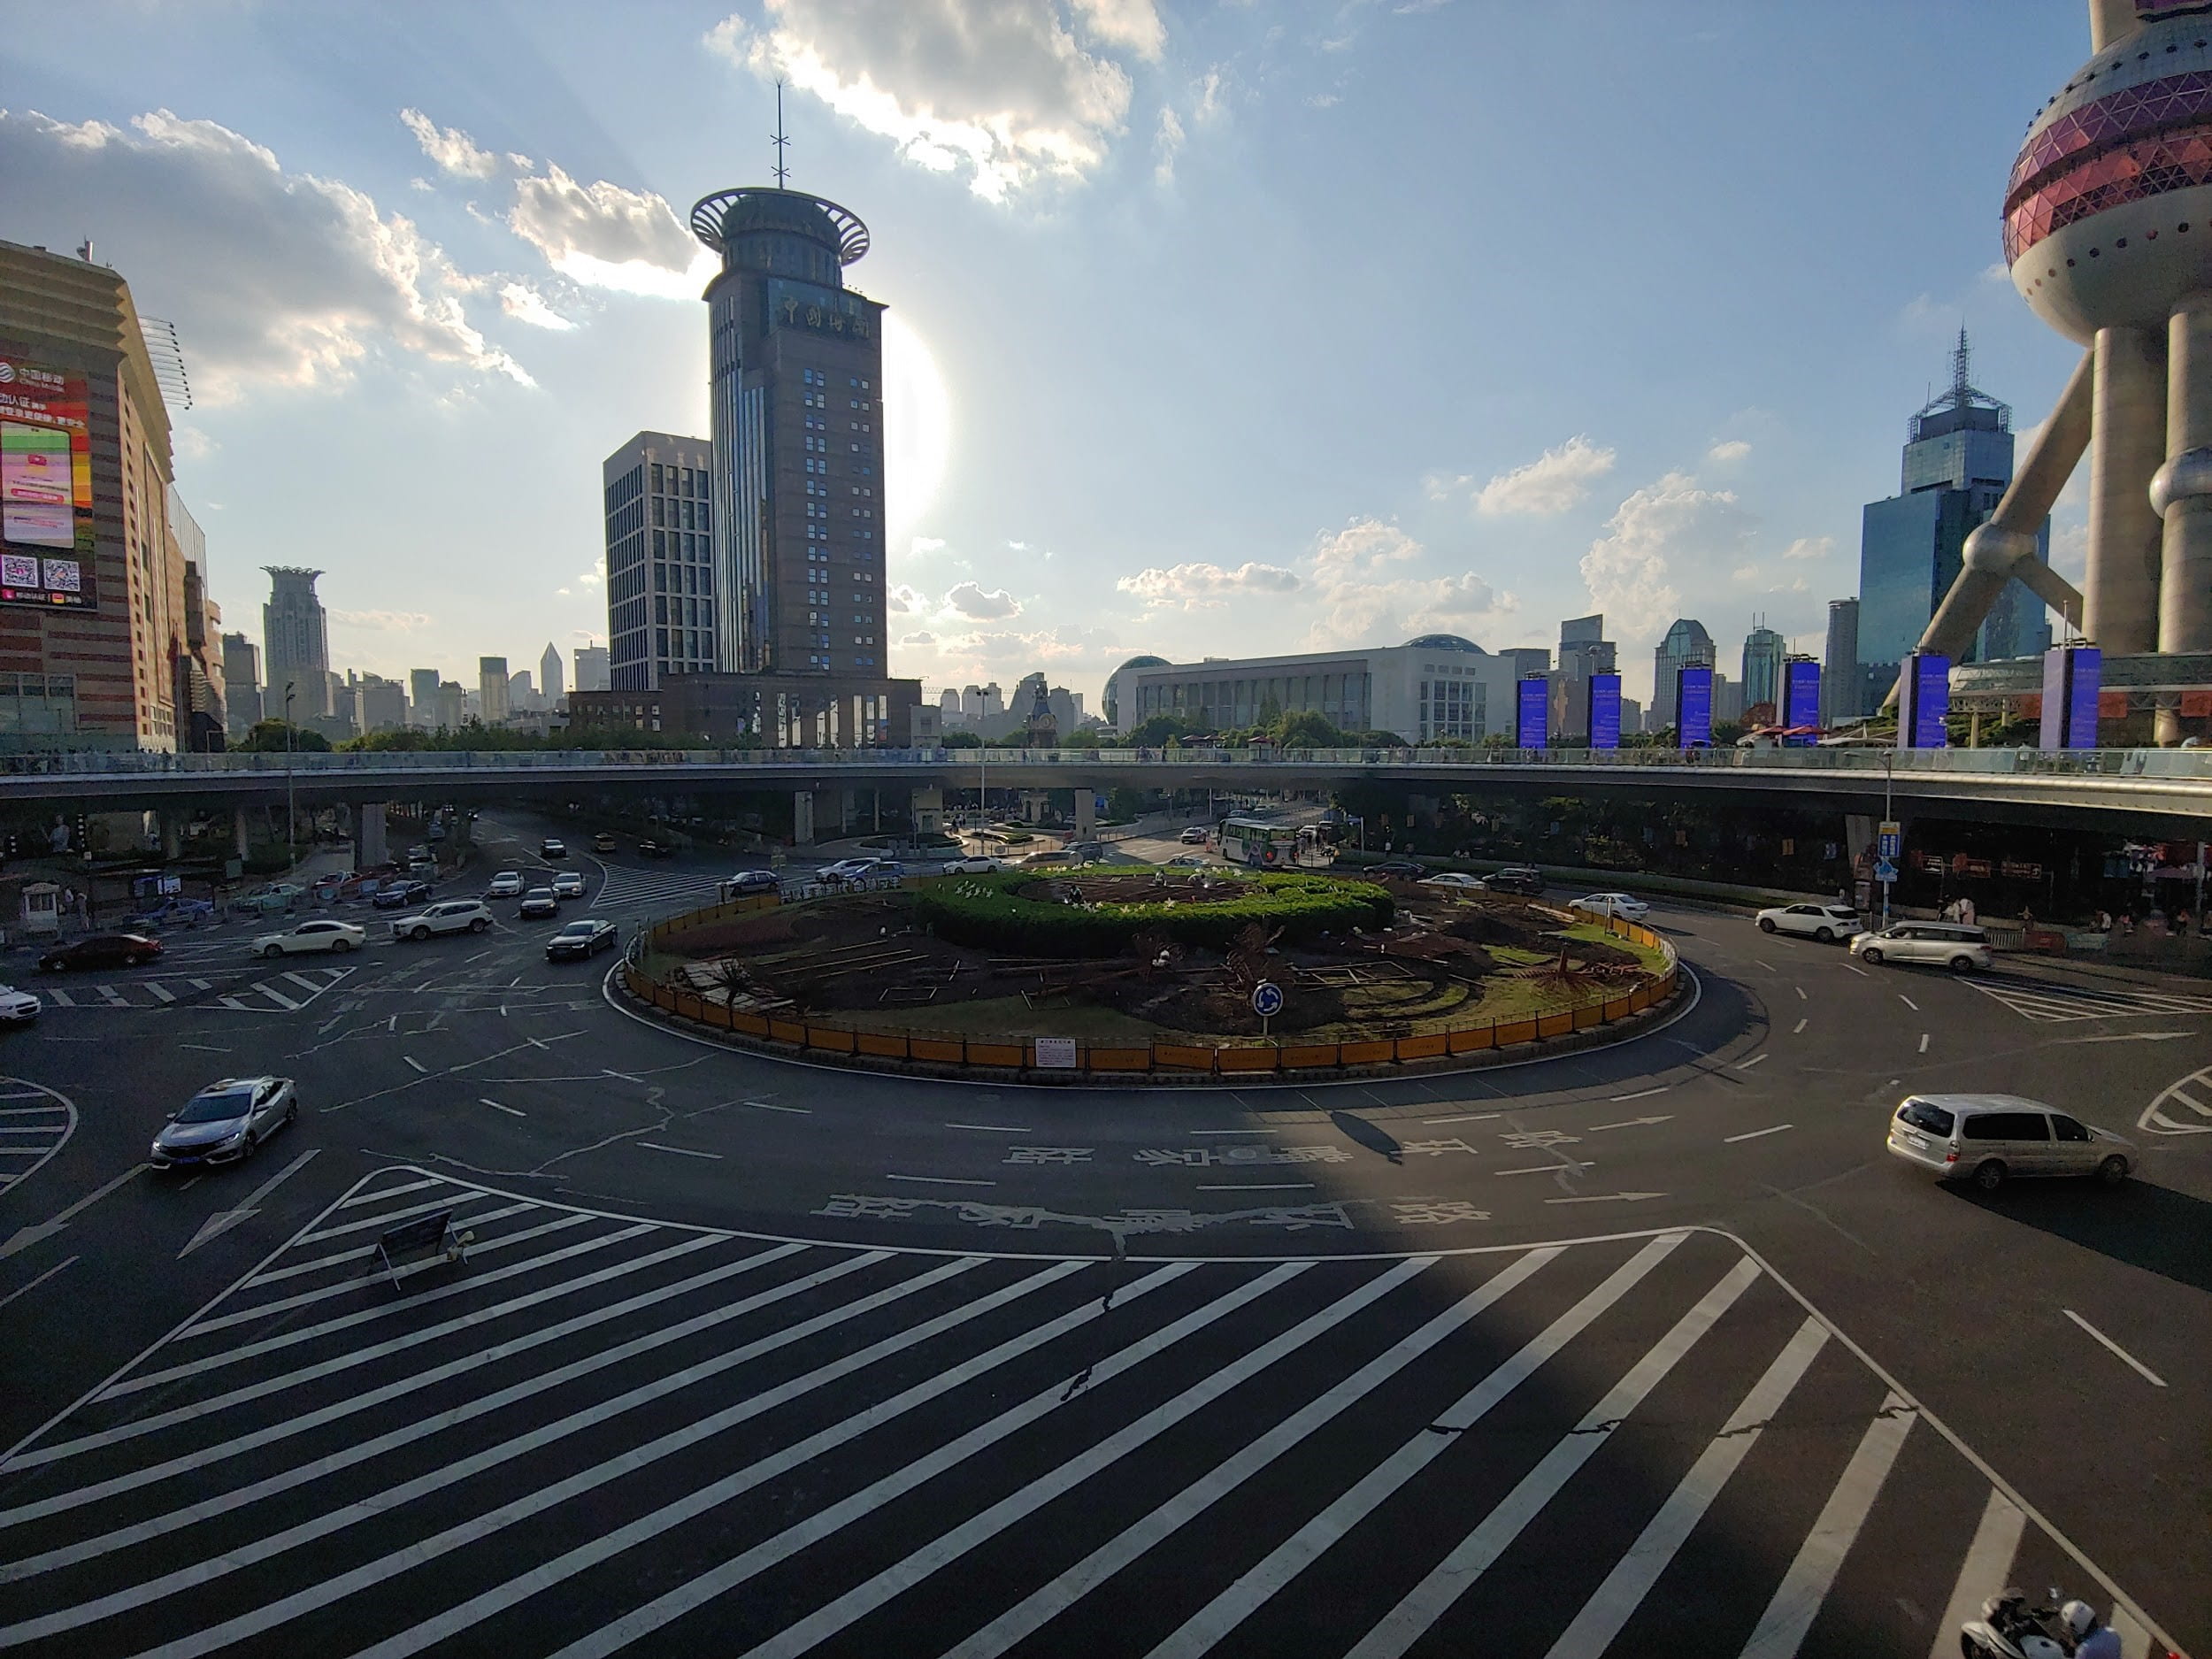 Roundabout in Shanghai with skyline and blue sky in the background